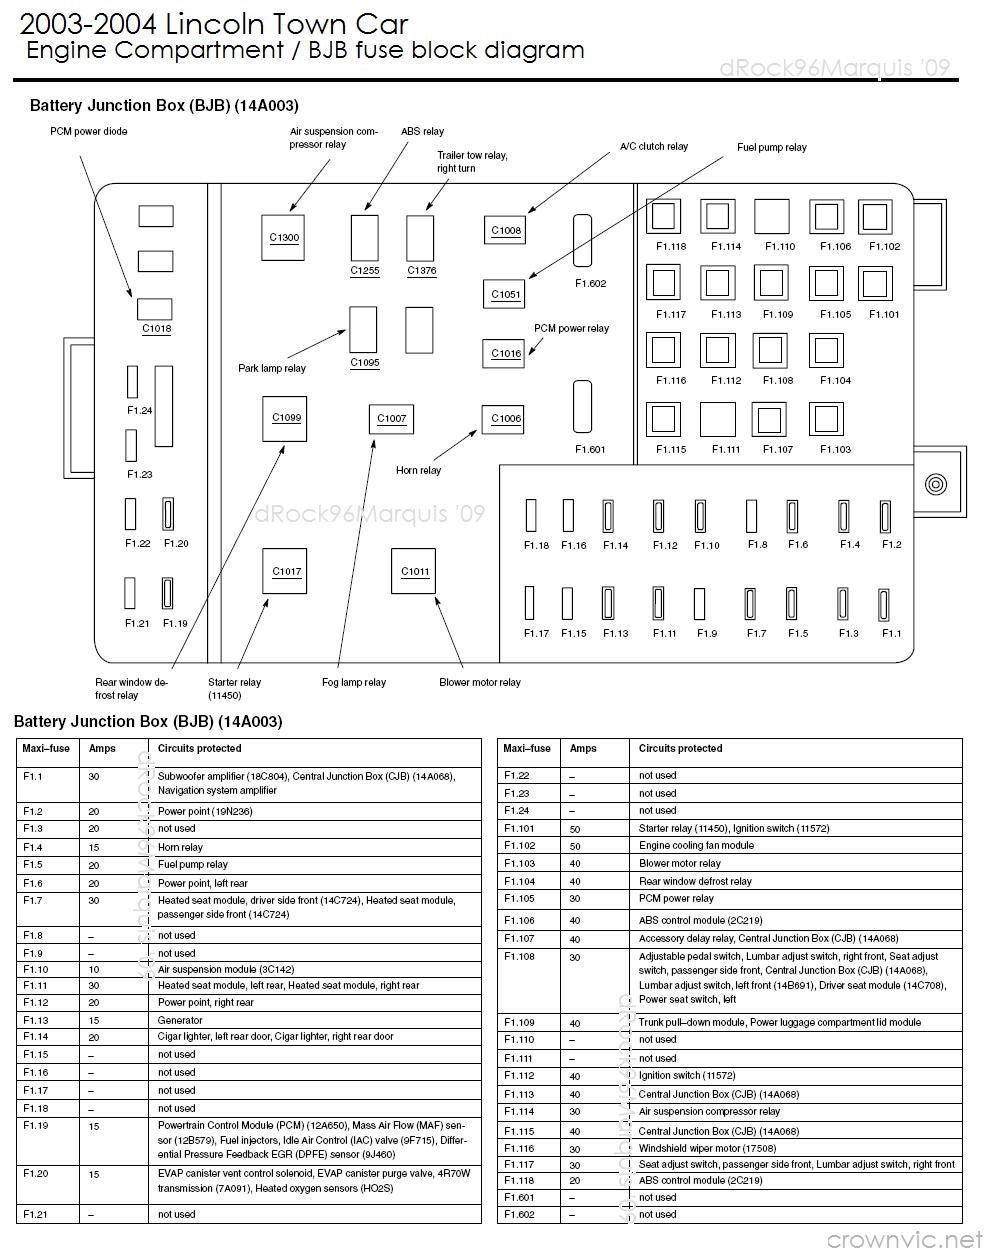 1998 Lincoln Town Car Radio Wiring Diagram from www.crownvic.net